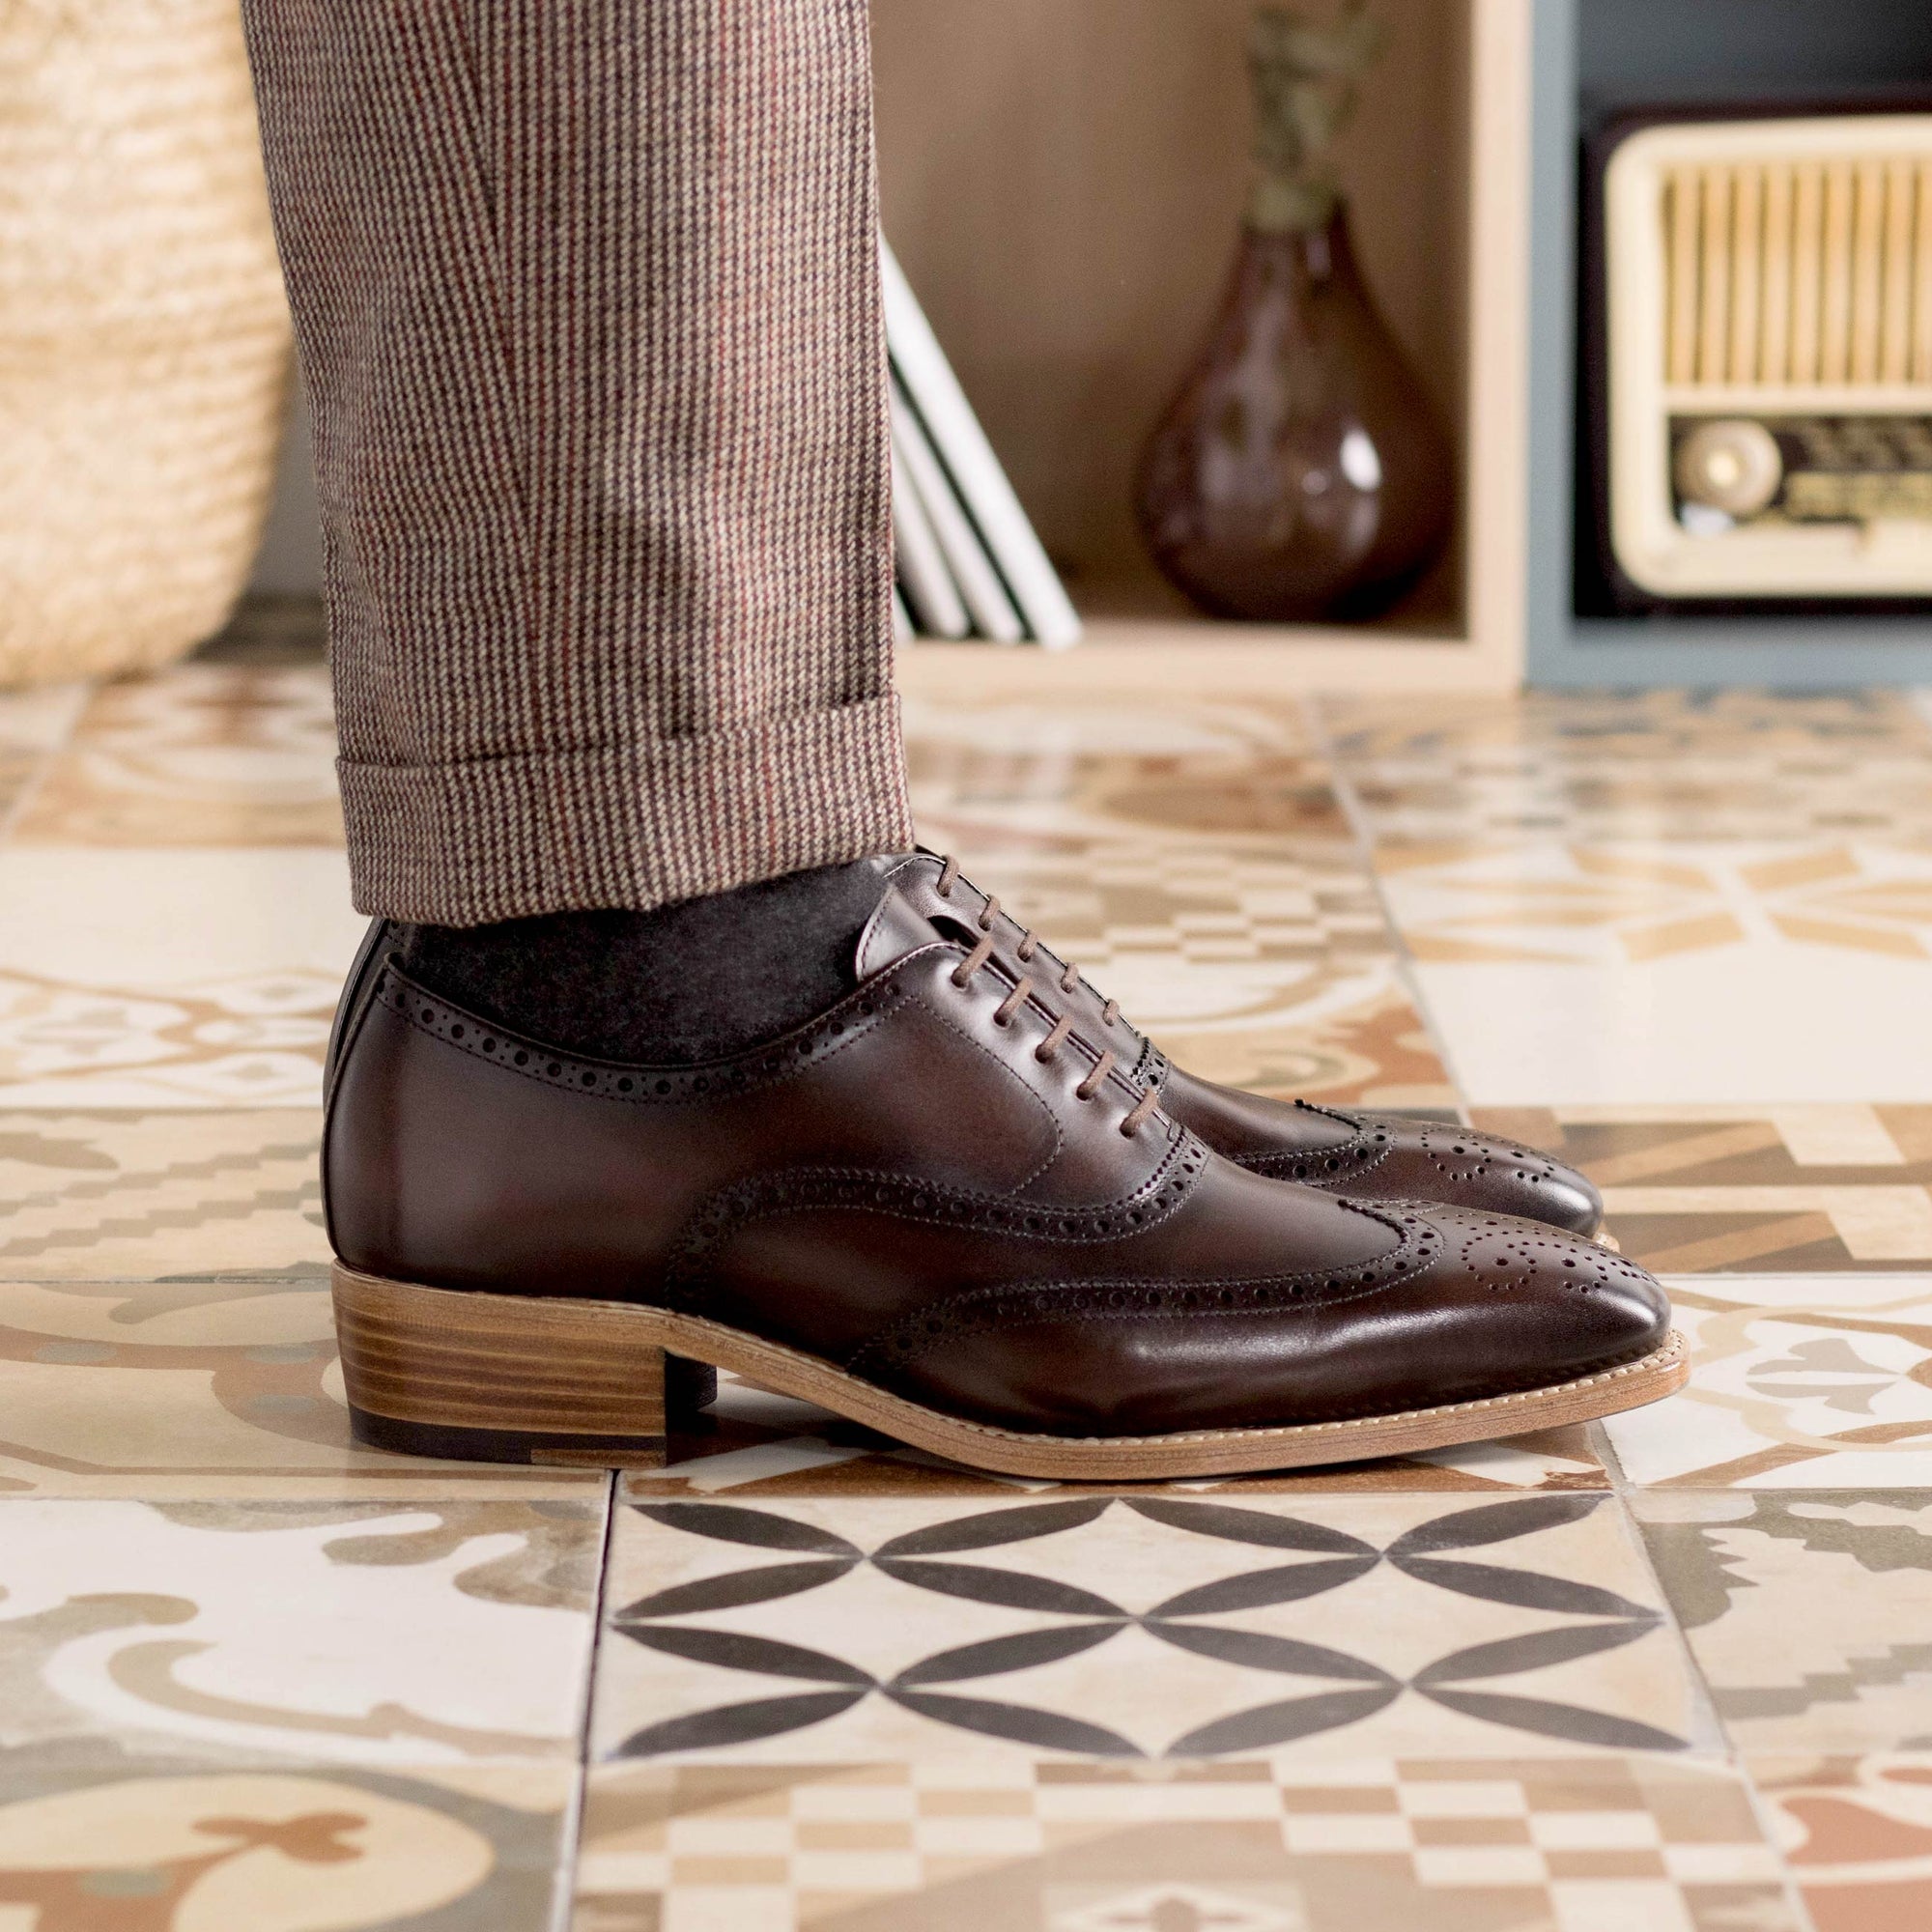 Wingtip Made in Spain Goodyear Welted Oxford brogues in Dark Brown Colour